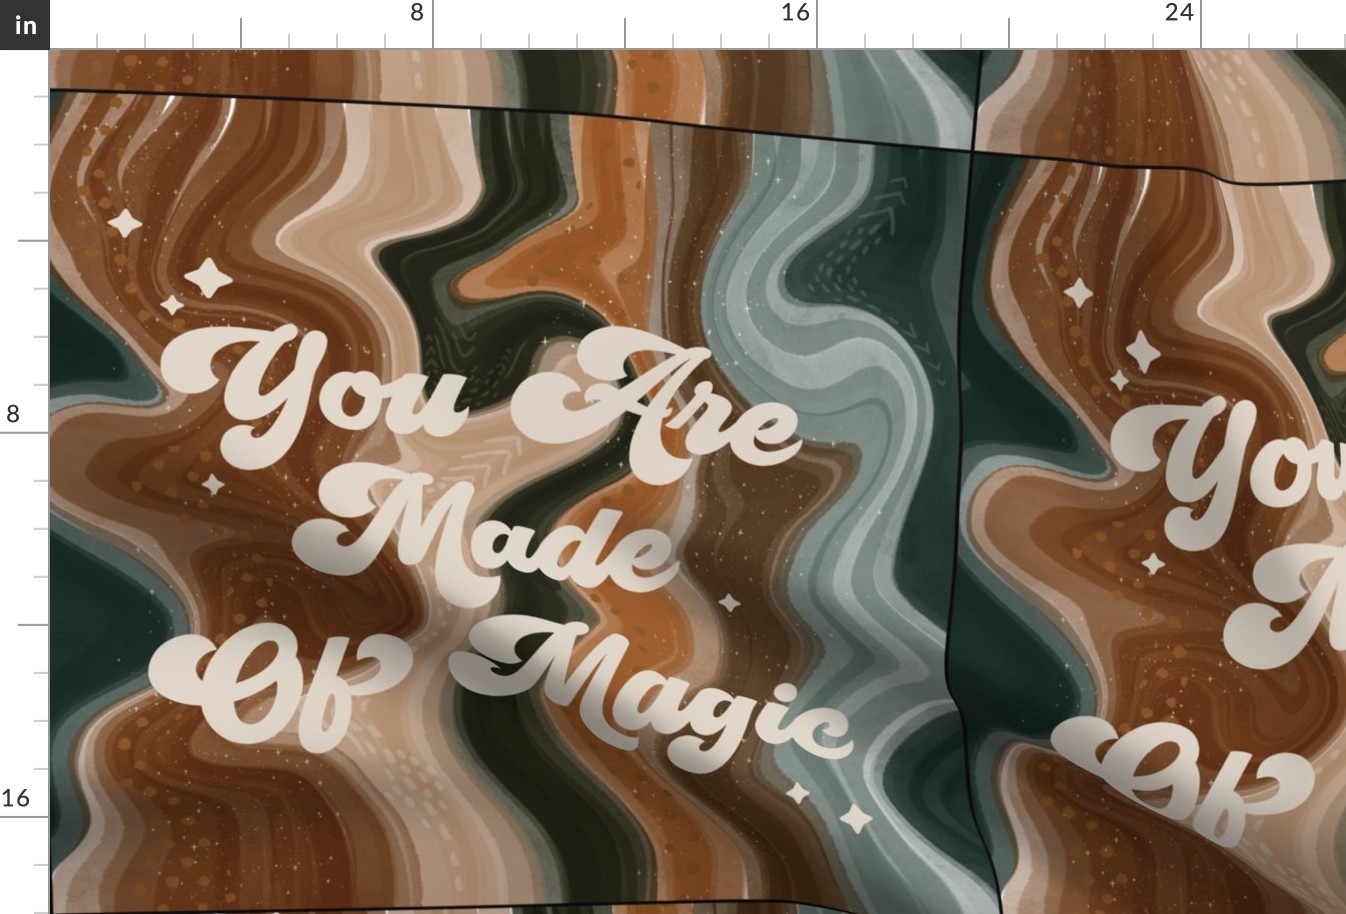 6 loveys: you are made of magic caramel and forest